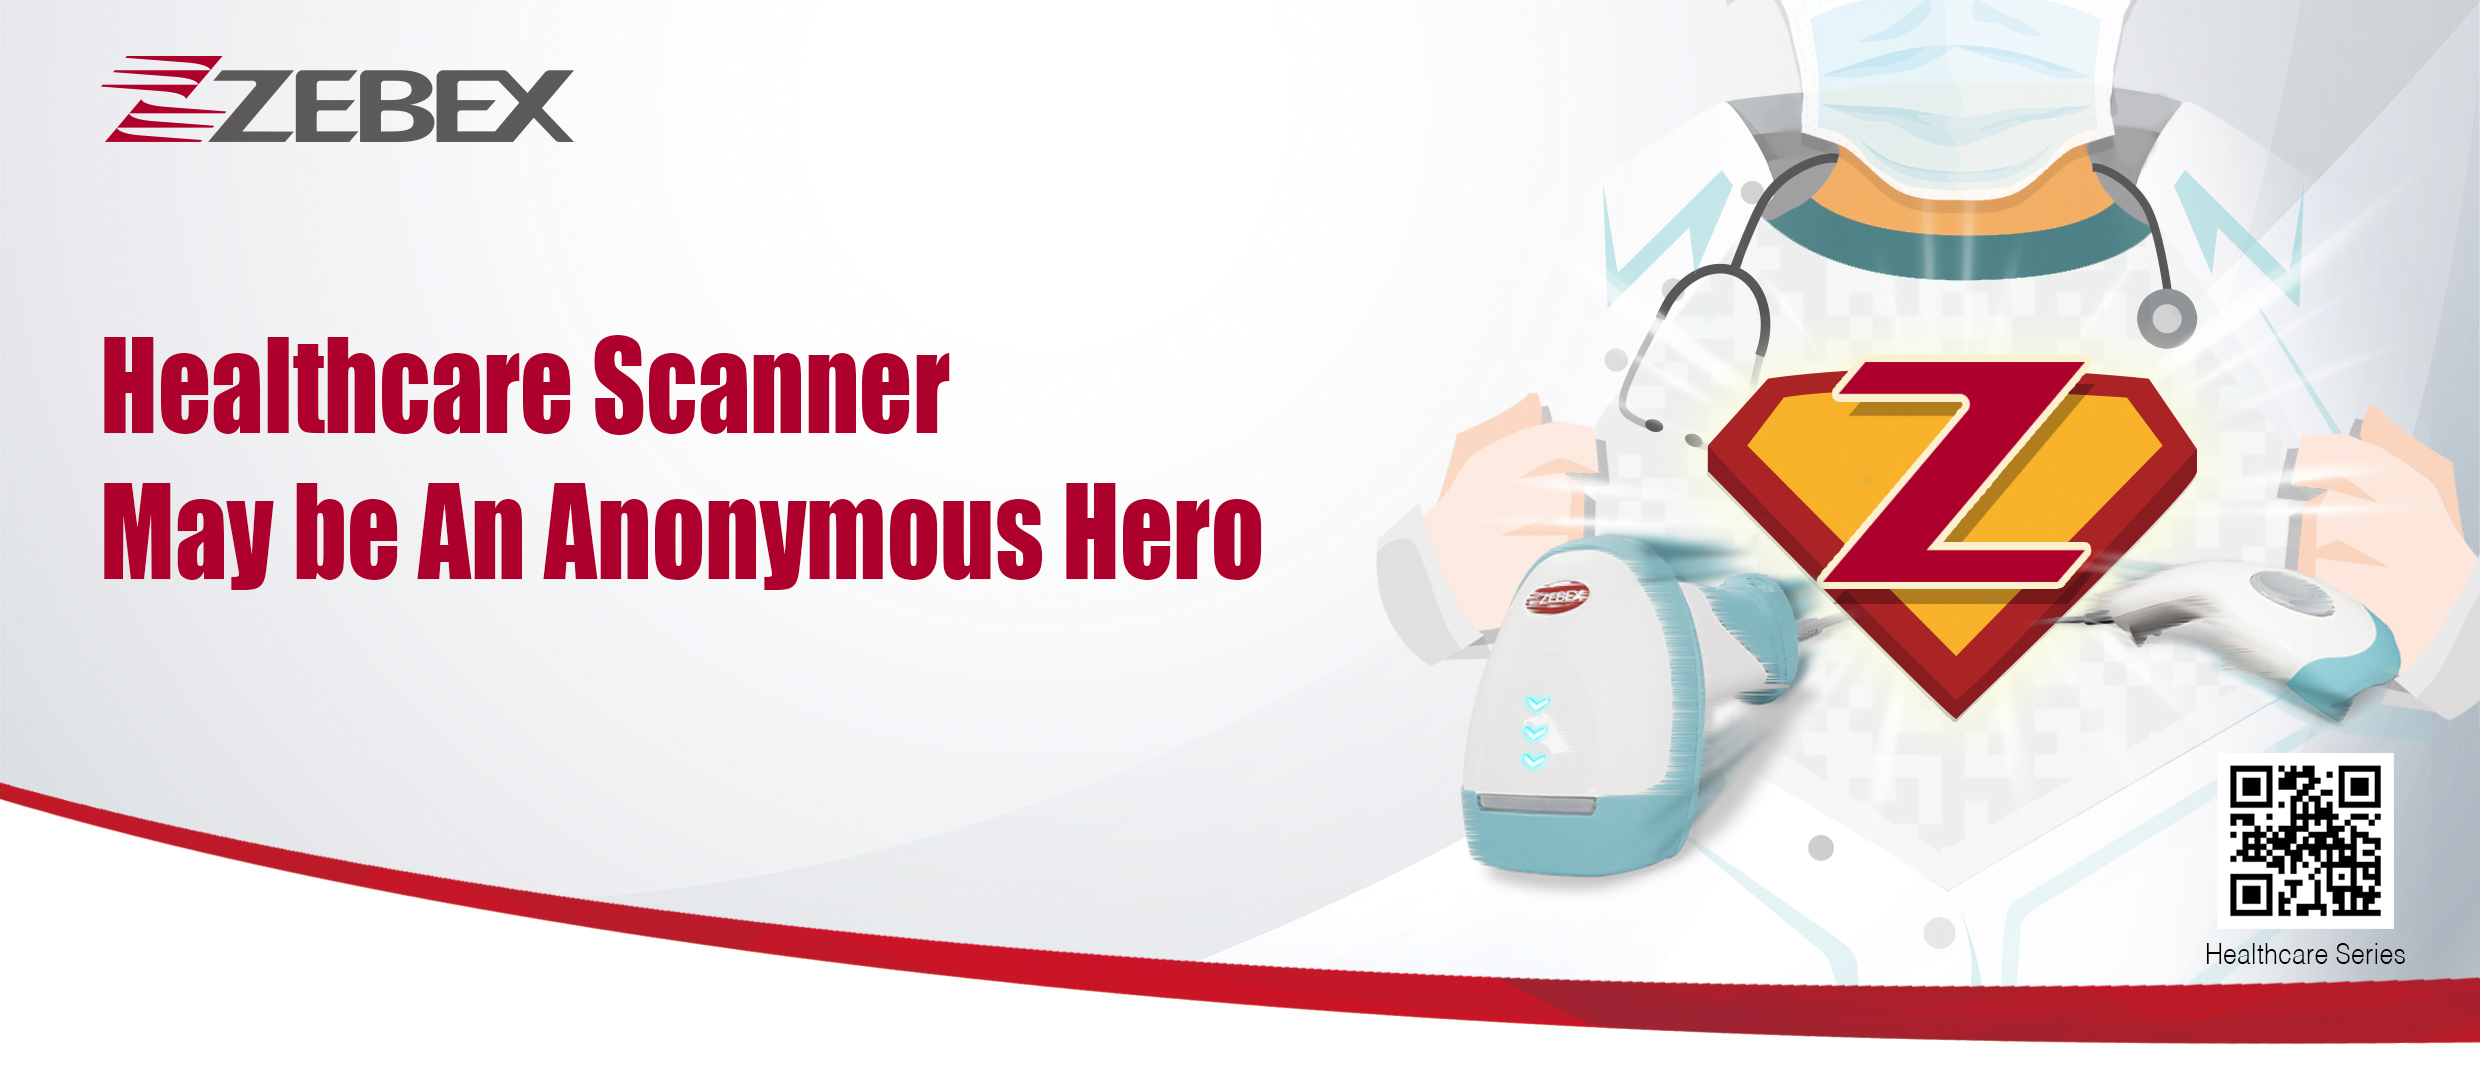 ZEBEX,Healthcare Scanner May be An Anonymous Hero